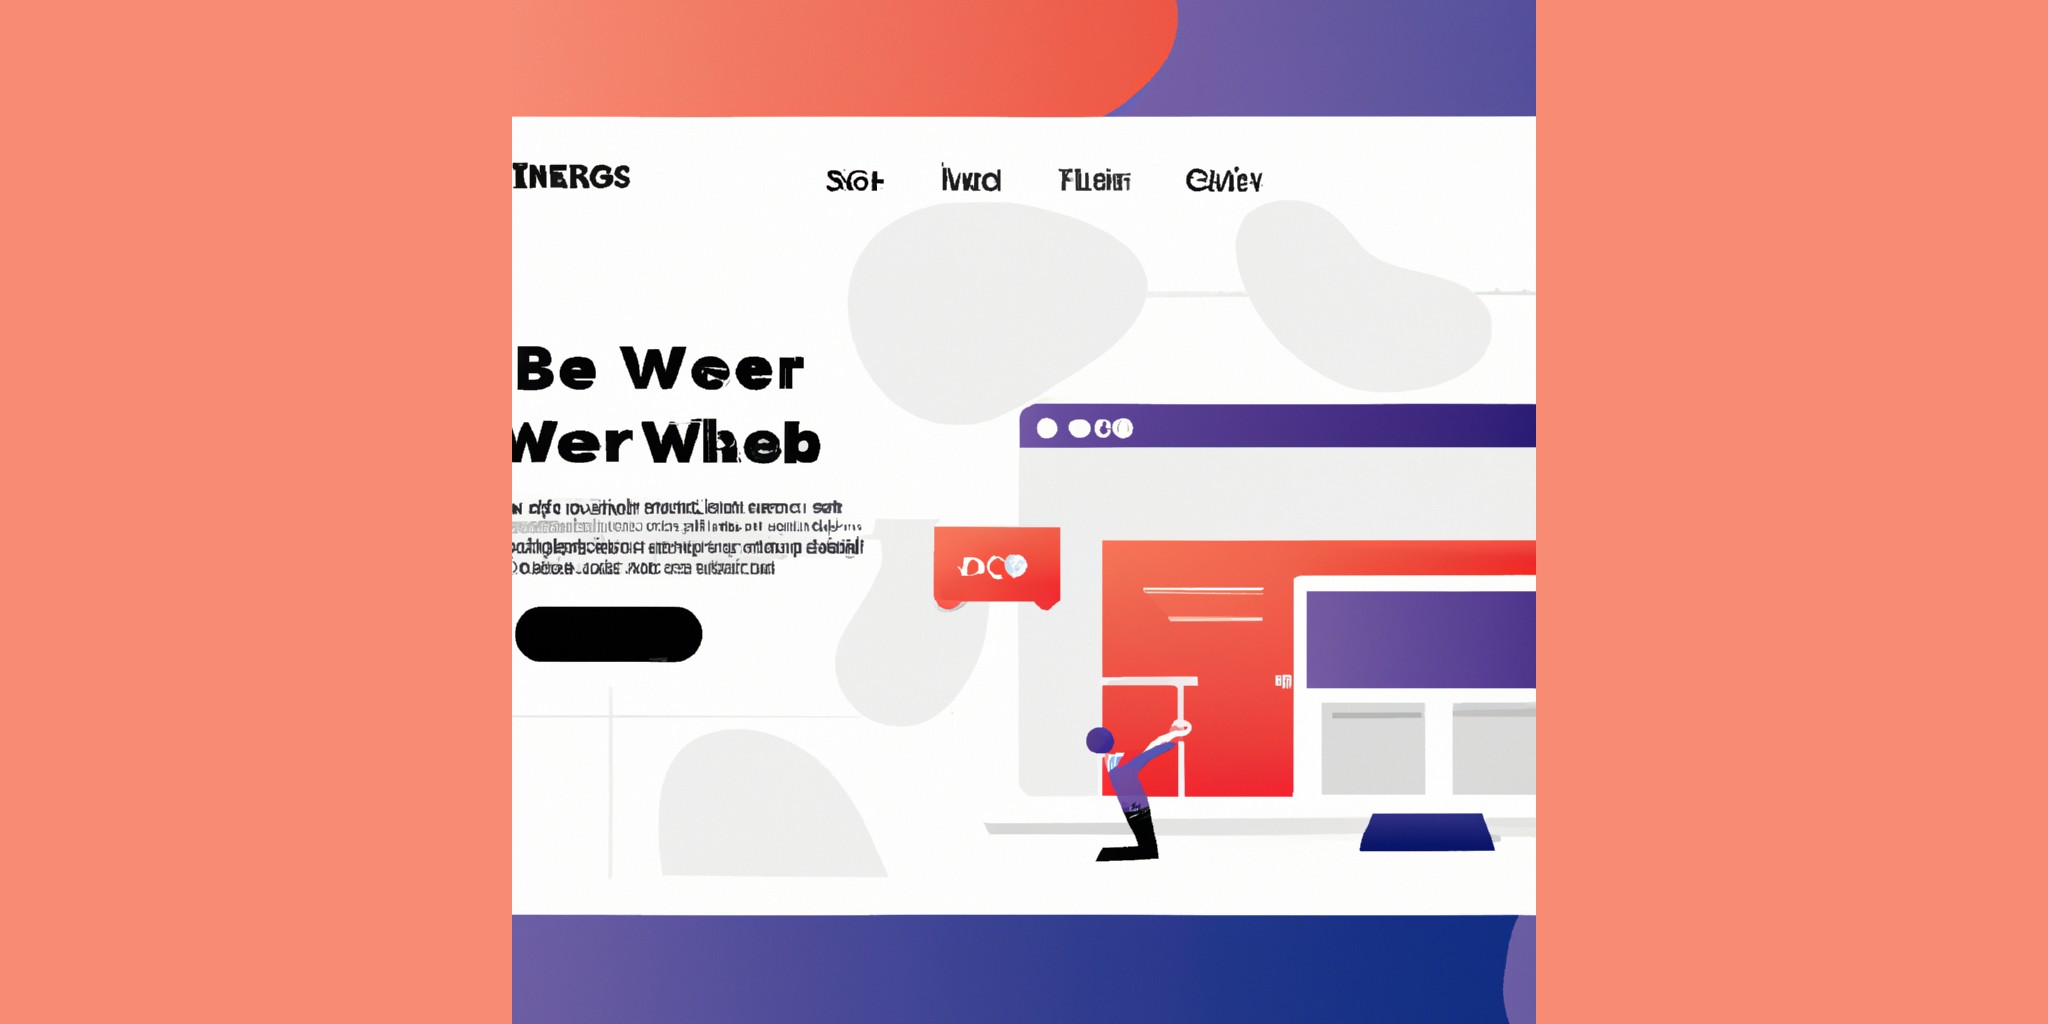 website in flat illustration style with gradients and white background